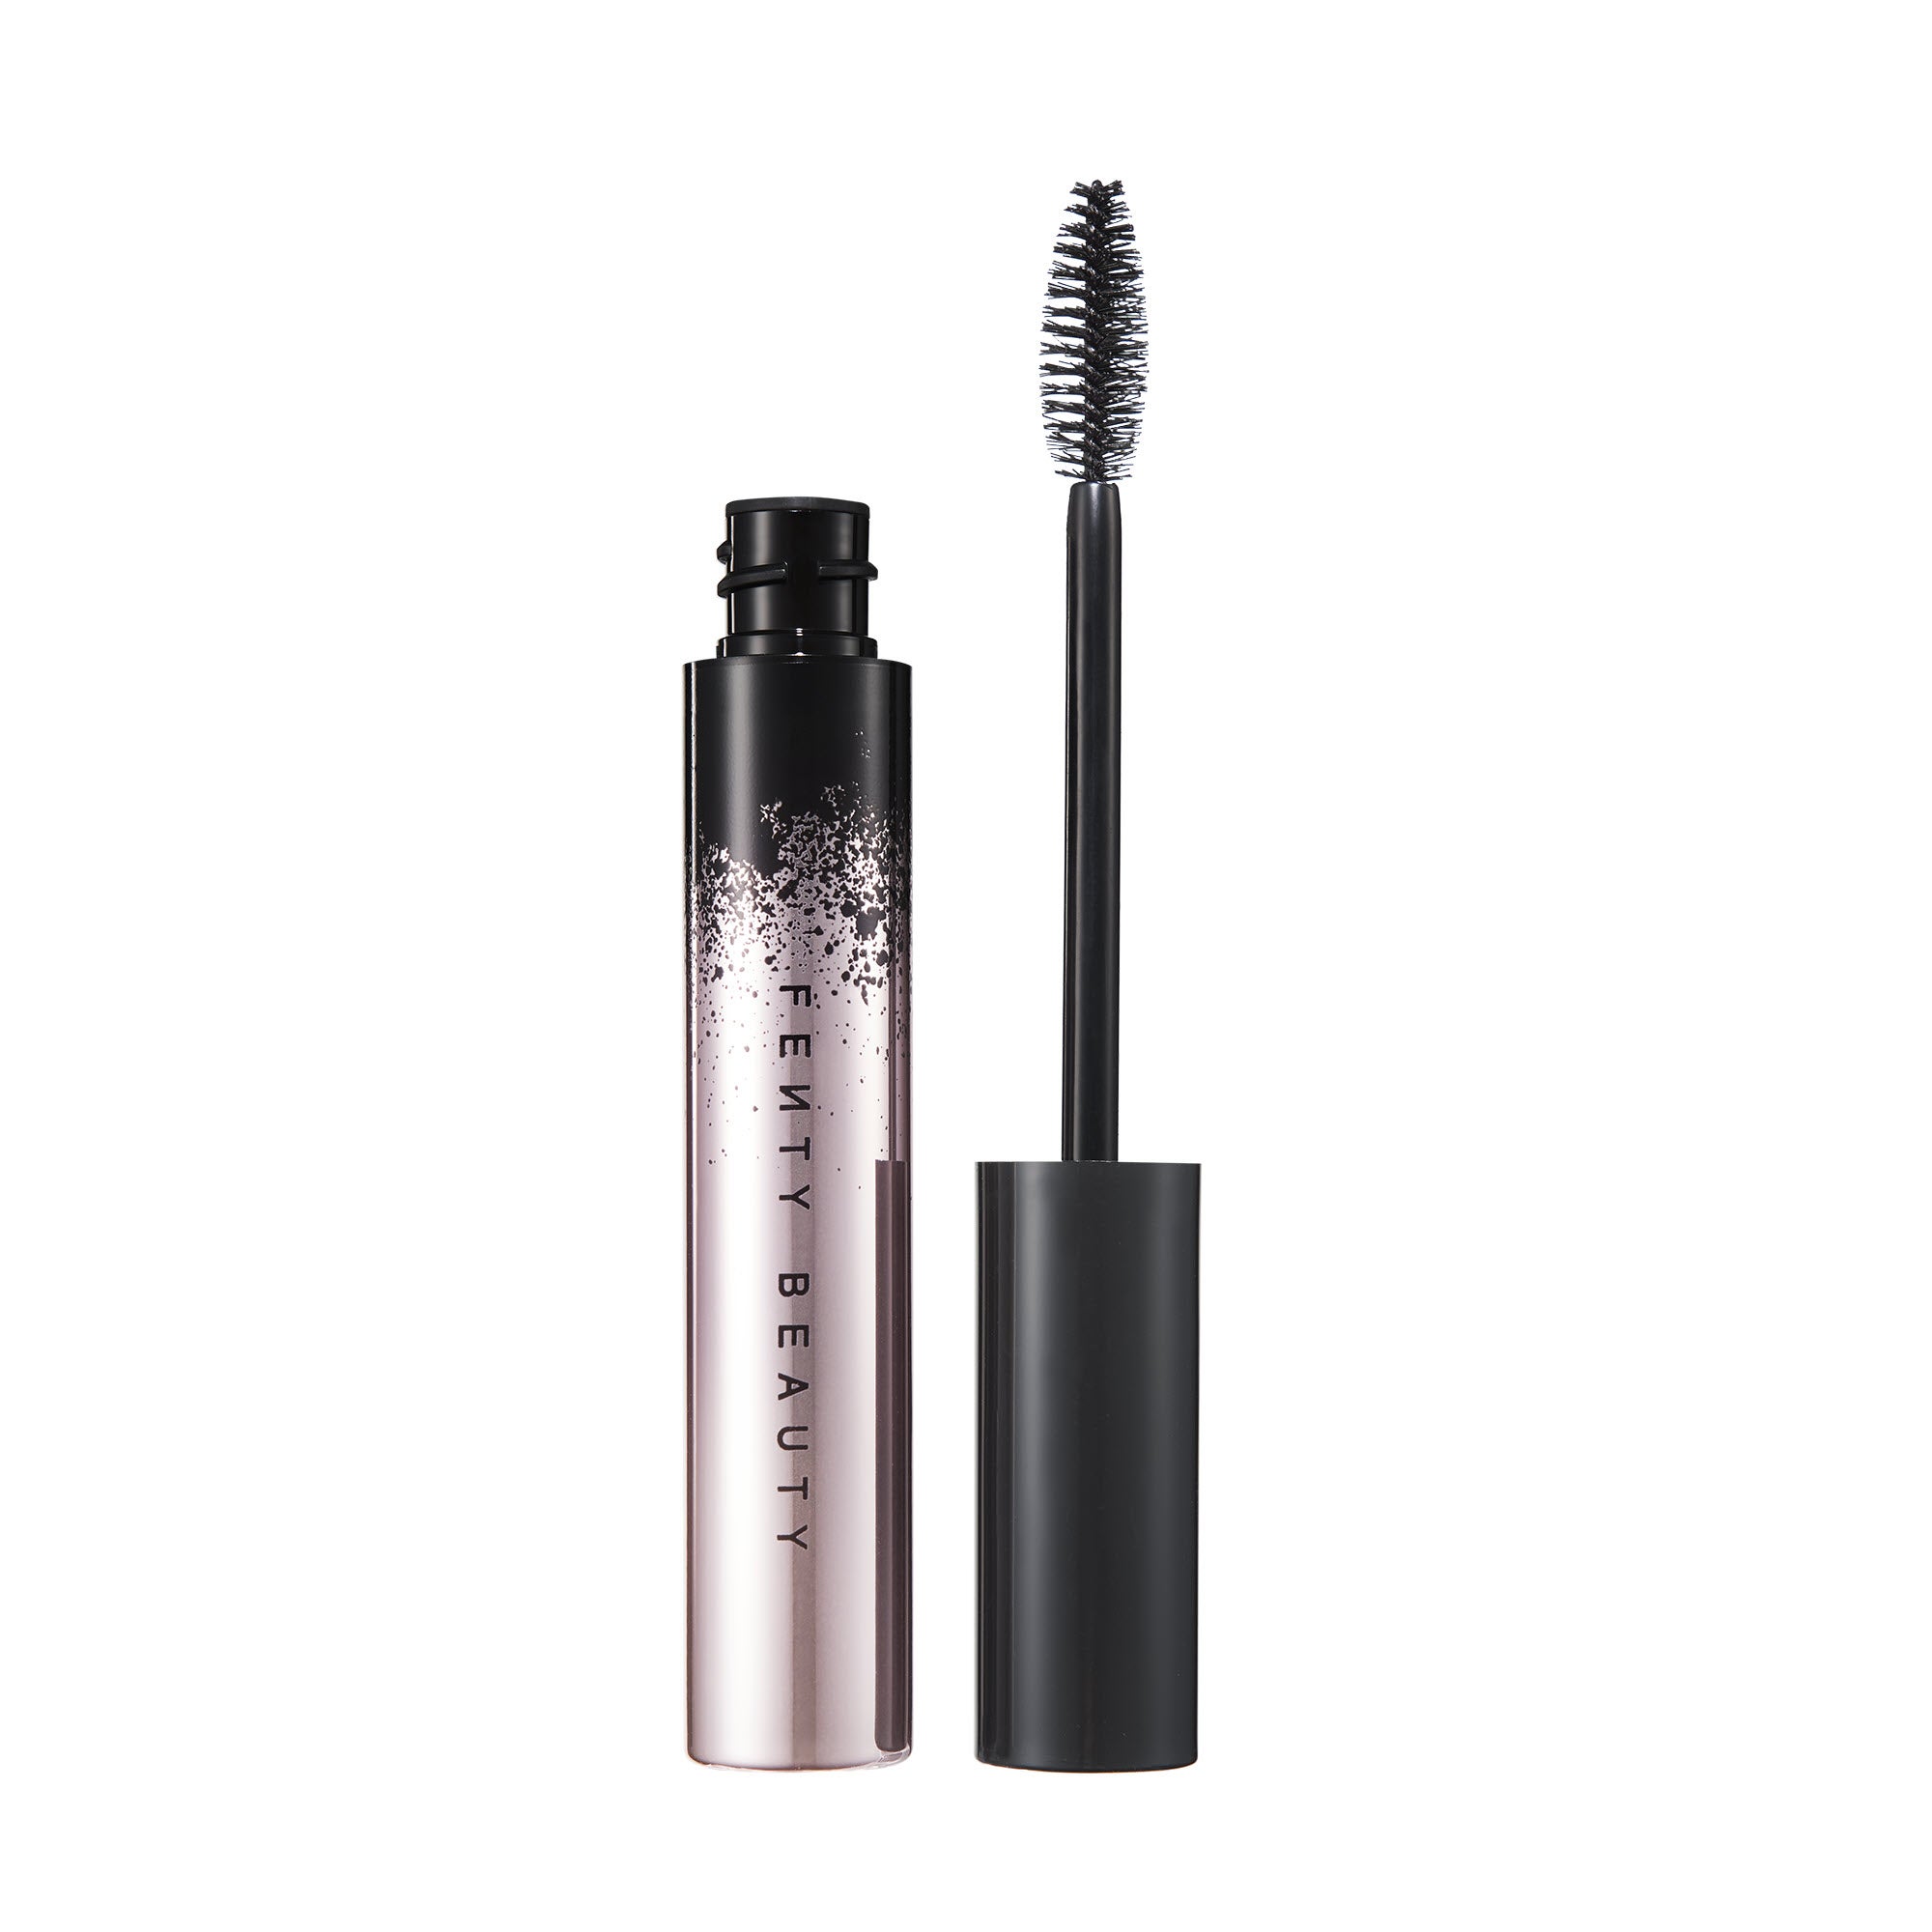 Found: The Mascara Of My Dreams